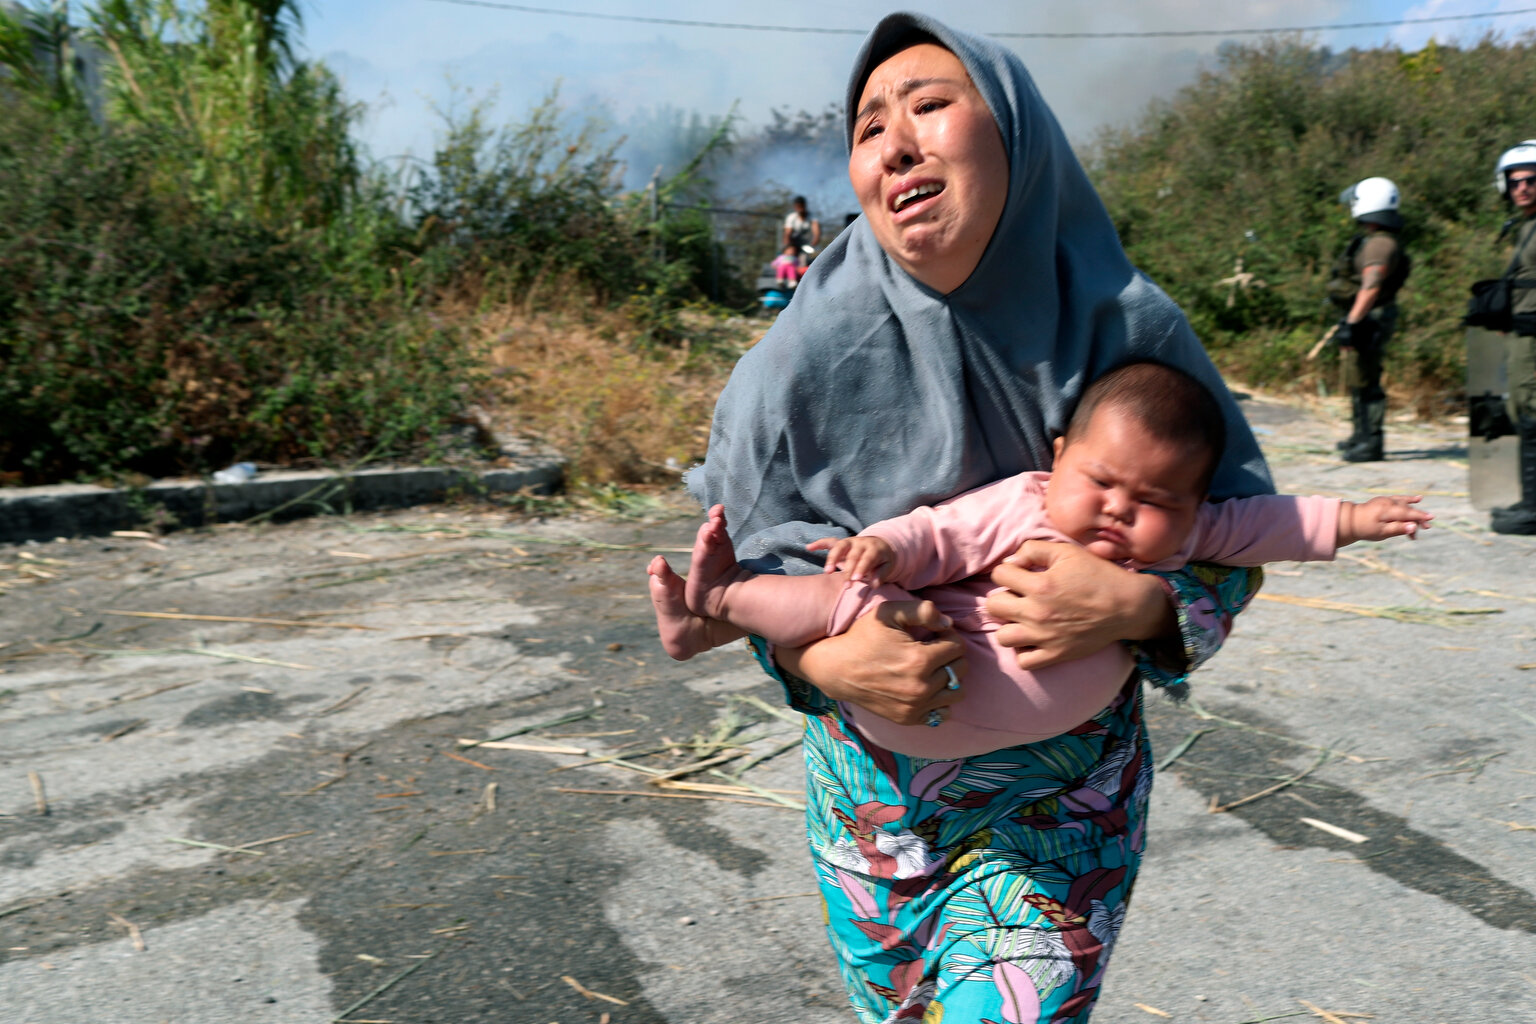  A migrant holds her baby as she runs to avoid a small fire in a field near Mytilene town, on the northeastern island of Lesbos, Greece, Saturday, Sept. 12, 2020. (AP Photo/Petros Giannakouris) 